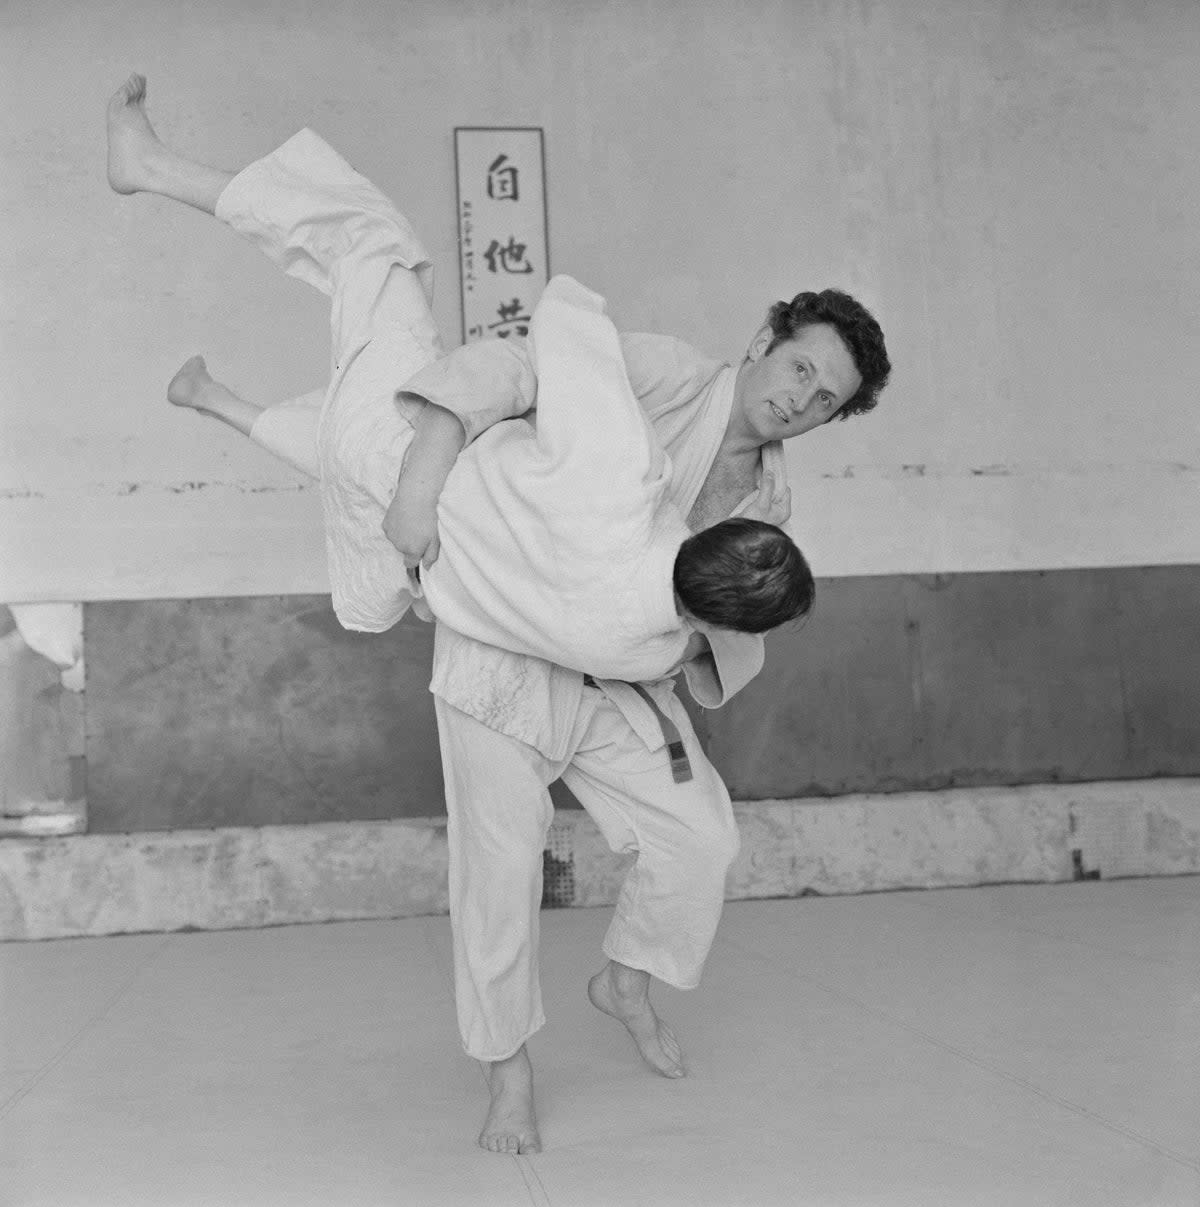 David Douglas and a Judo Instructor (Getty Images)